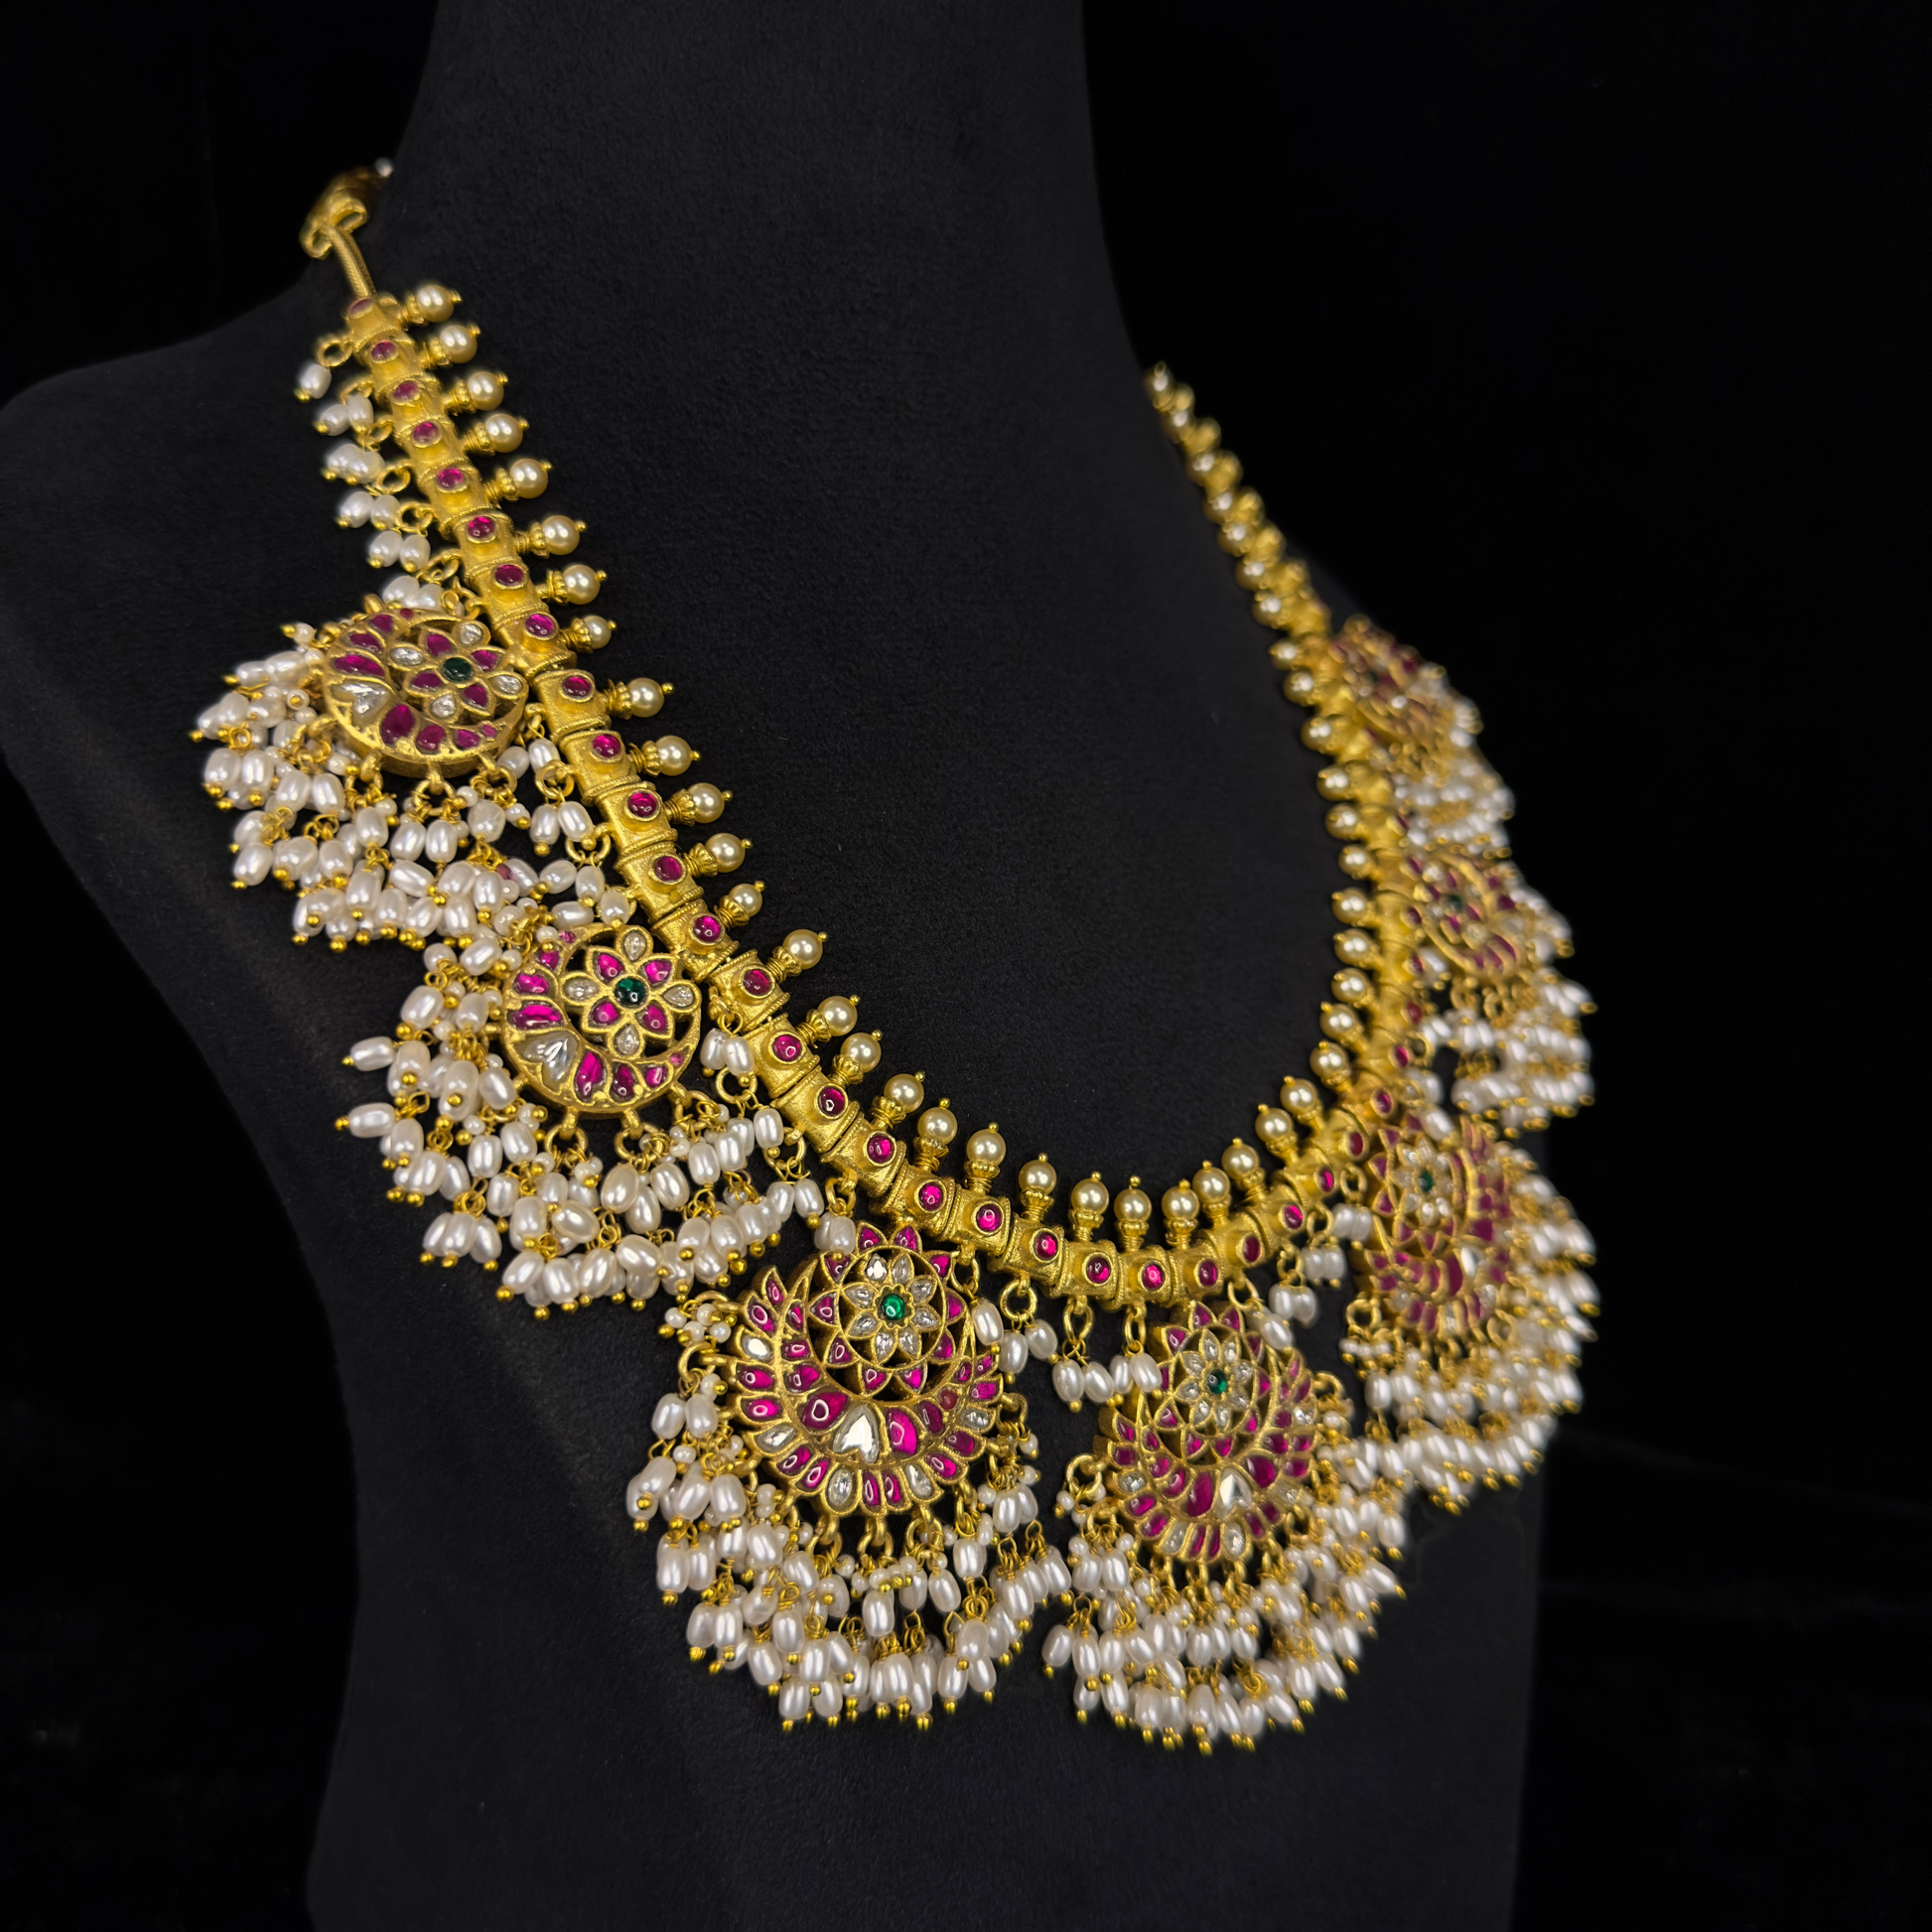 Opulent Guttapusulu Jadau Kundan Necklace with Pearl Tassels and Floral Accents with 22k gold platingThis product belongs to Jadau Kundan jewellery Category